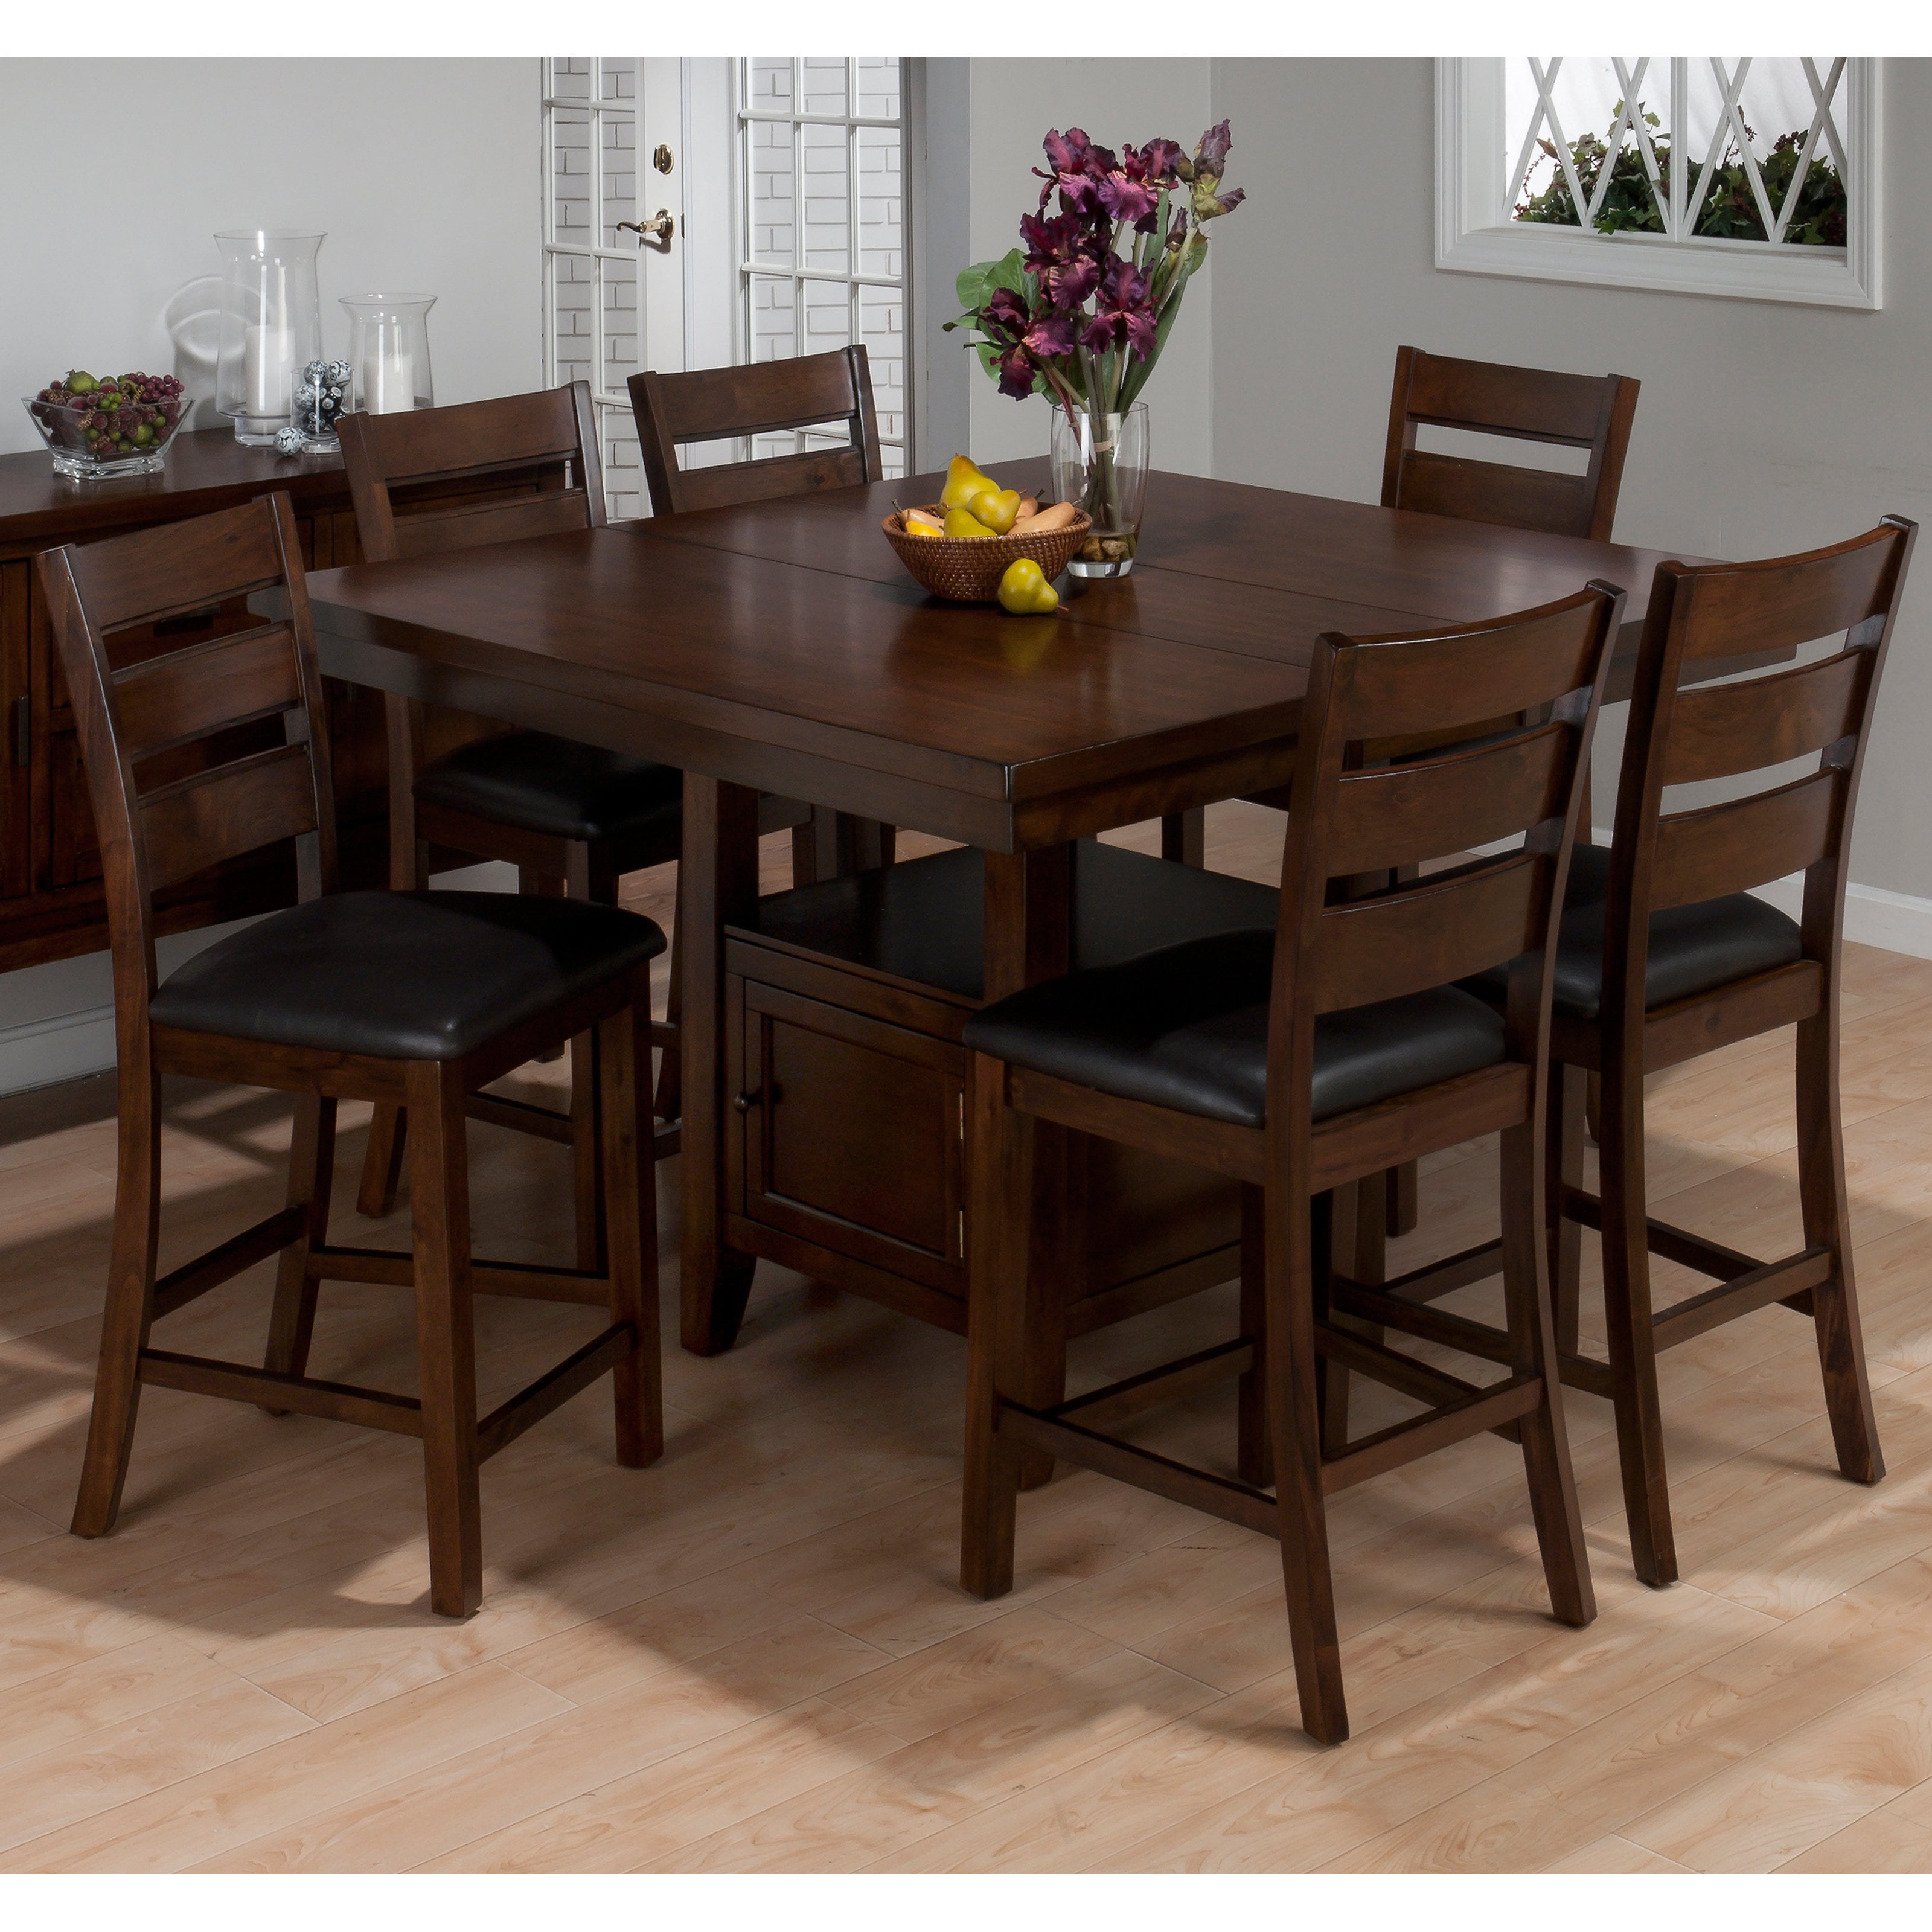 6 Person Pub Table Set Off 69, 6 Person Dining Room Table Sets